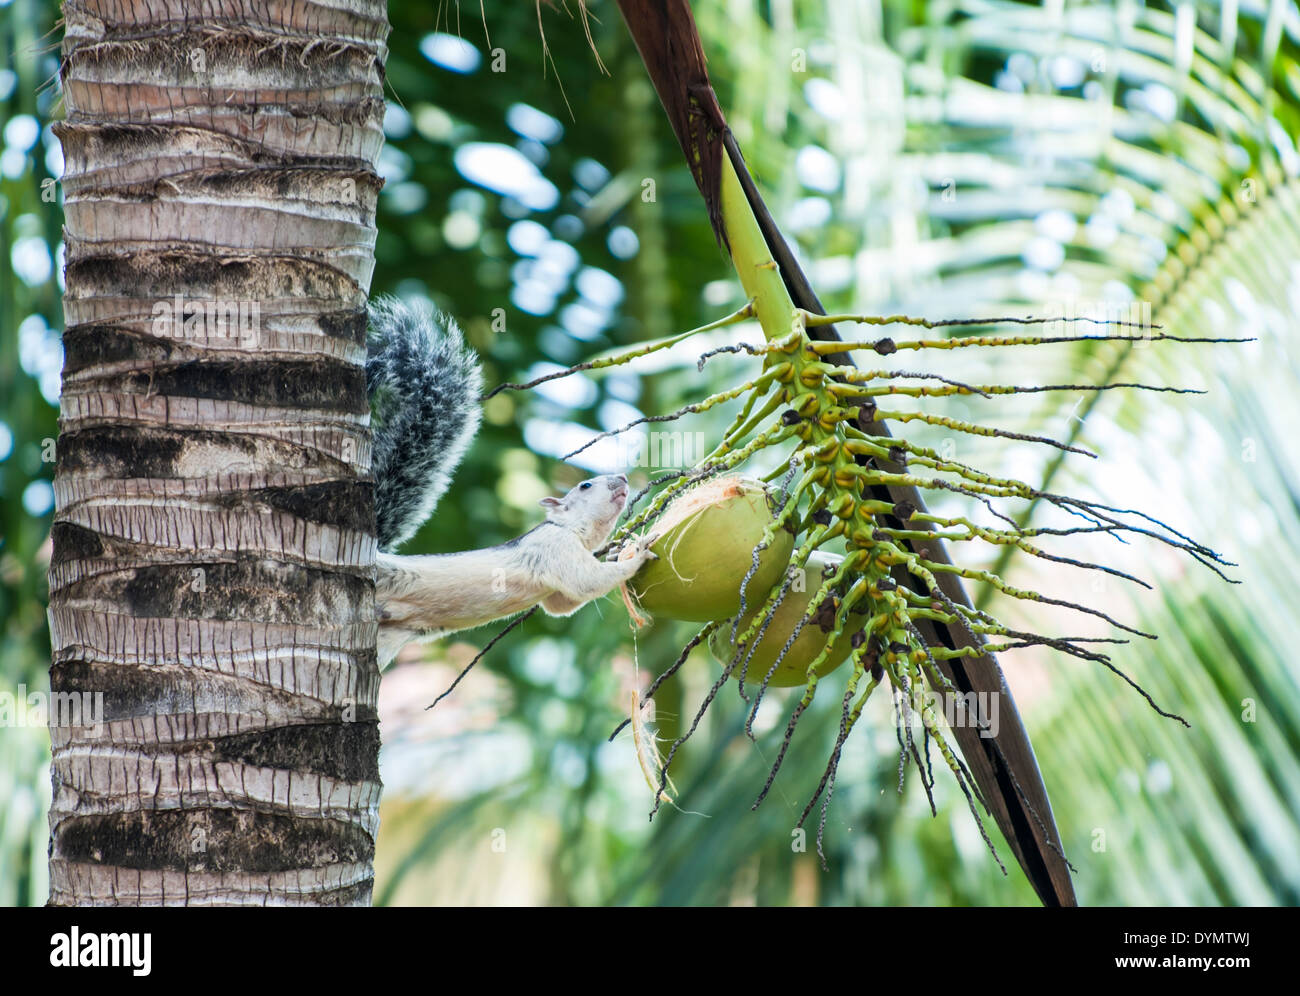 Variegated tree squirrel pauses from chewing on a coconut Stock Photo